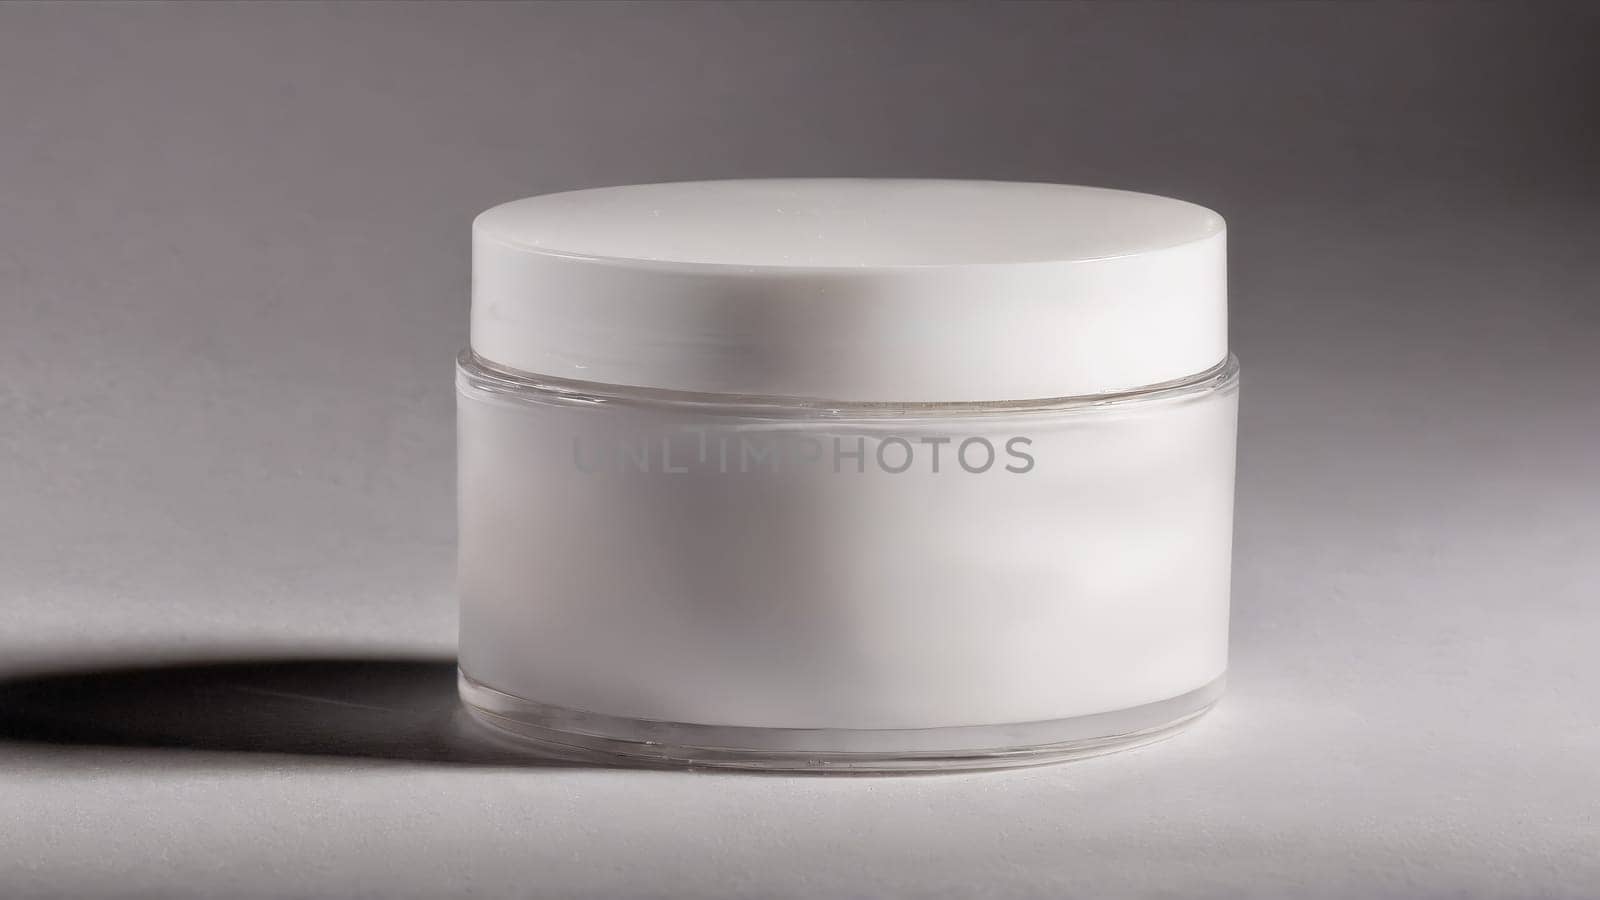 Mattifying setting powder with oil absorbing particles airbrushed finish blurring effect translucent hues mockup by panophotograph